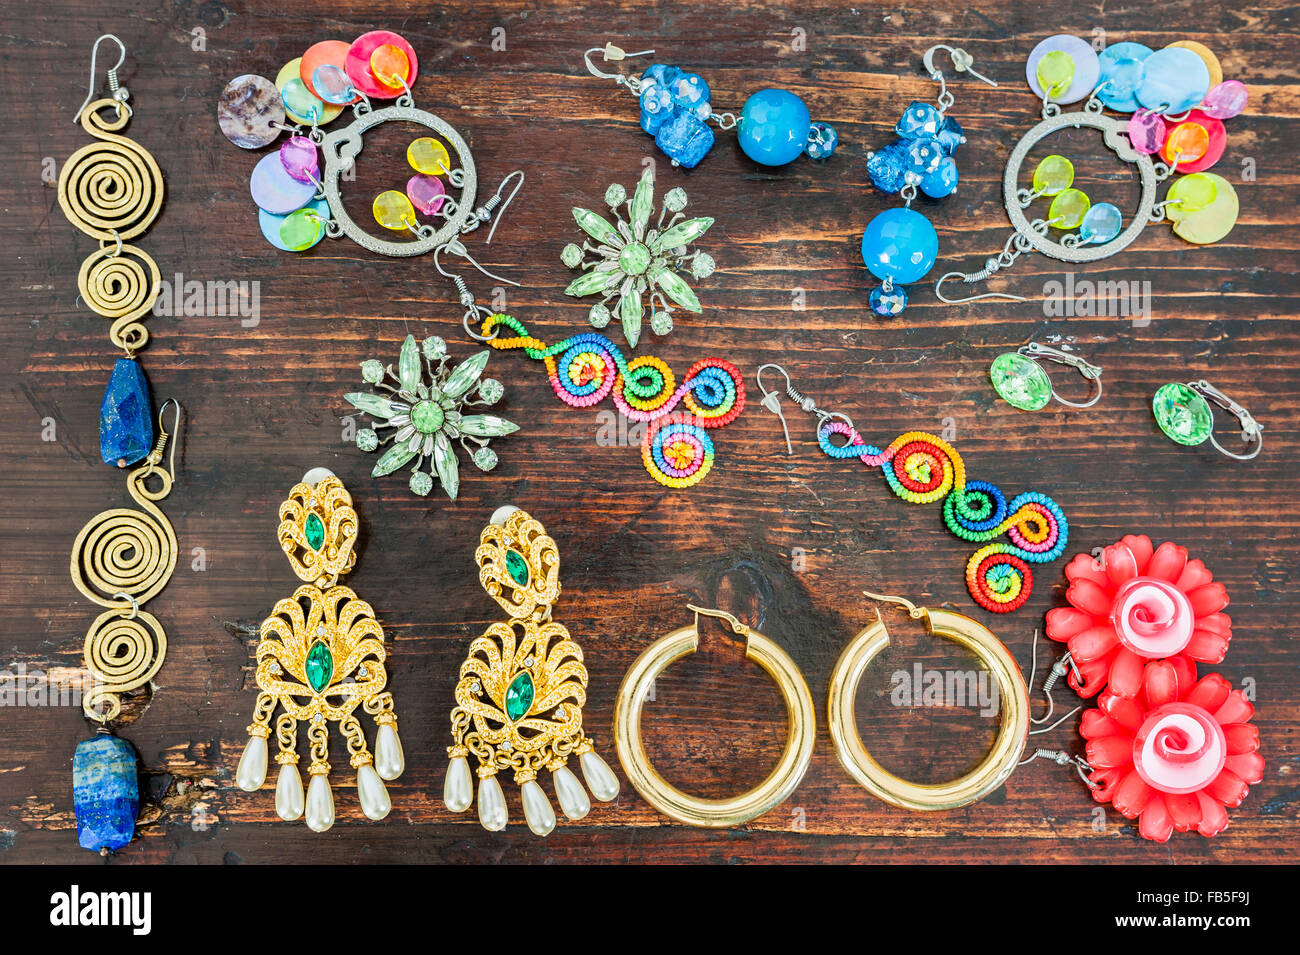 Women's jewelry. Various types of earrings very colorful. Stock Photo